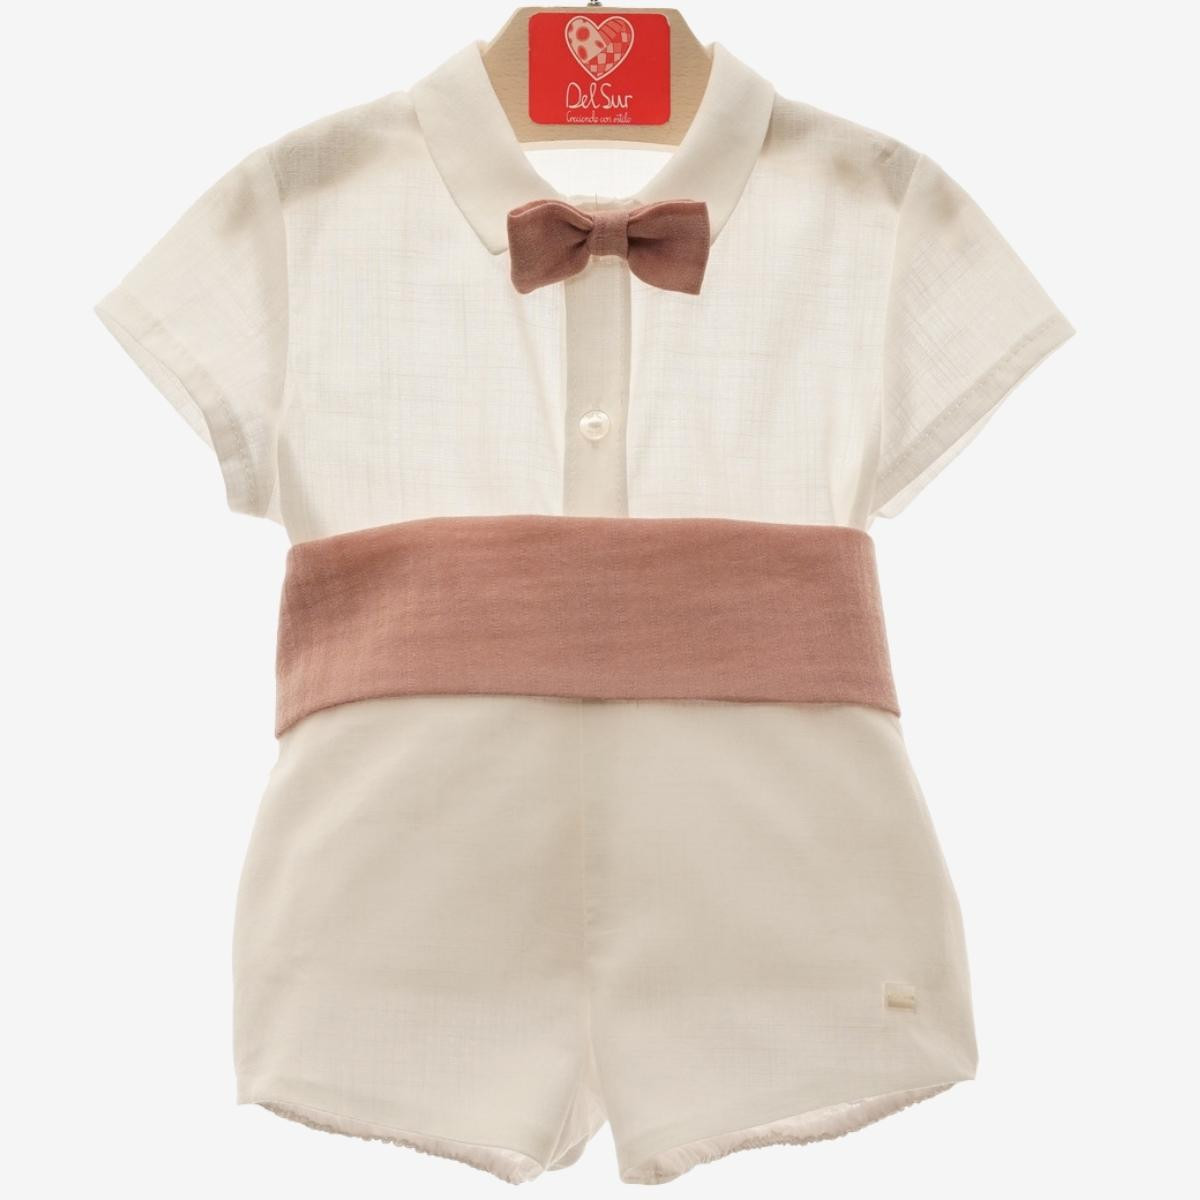 POLO WITH BOW TIE AND PANTS WAISTBAND DELSUR - 3